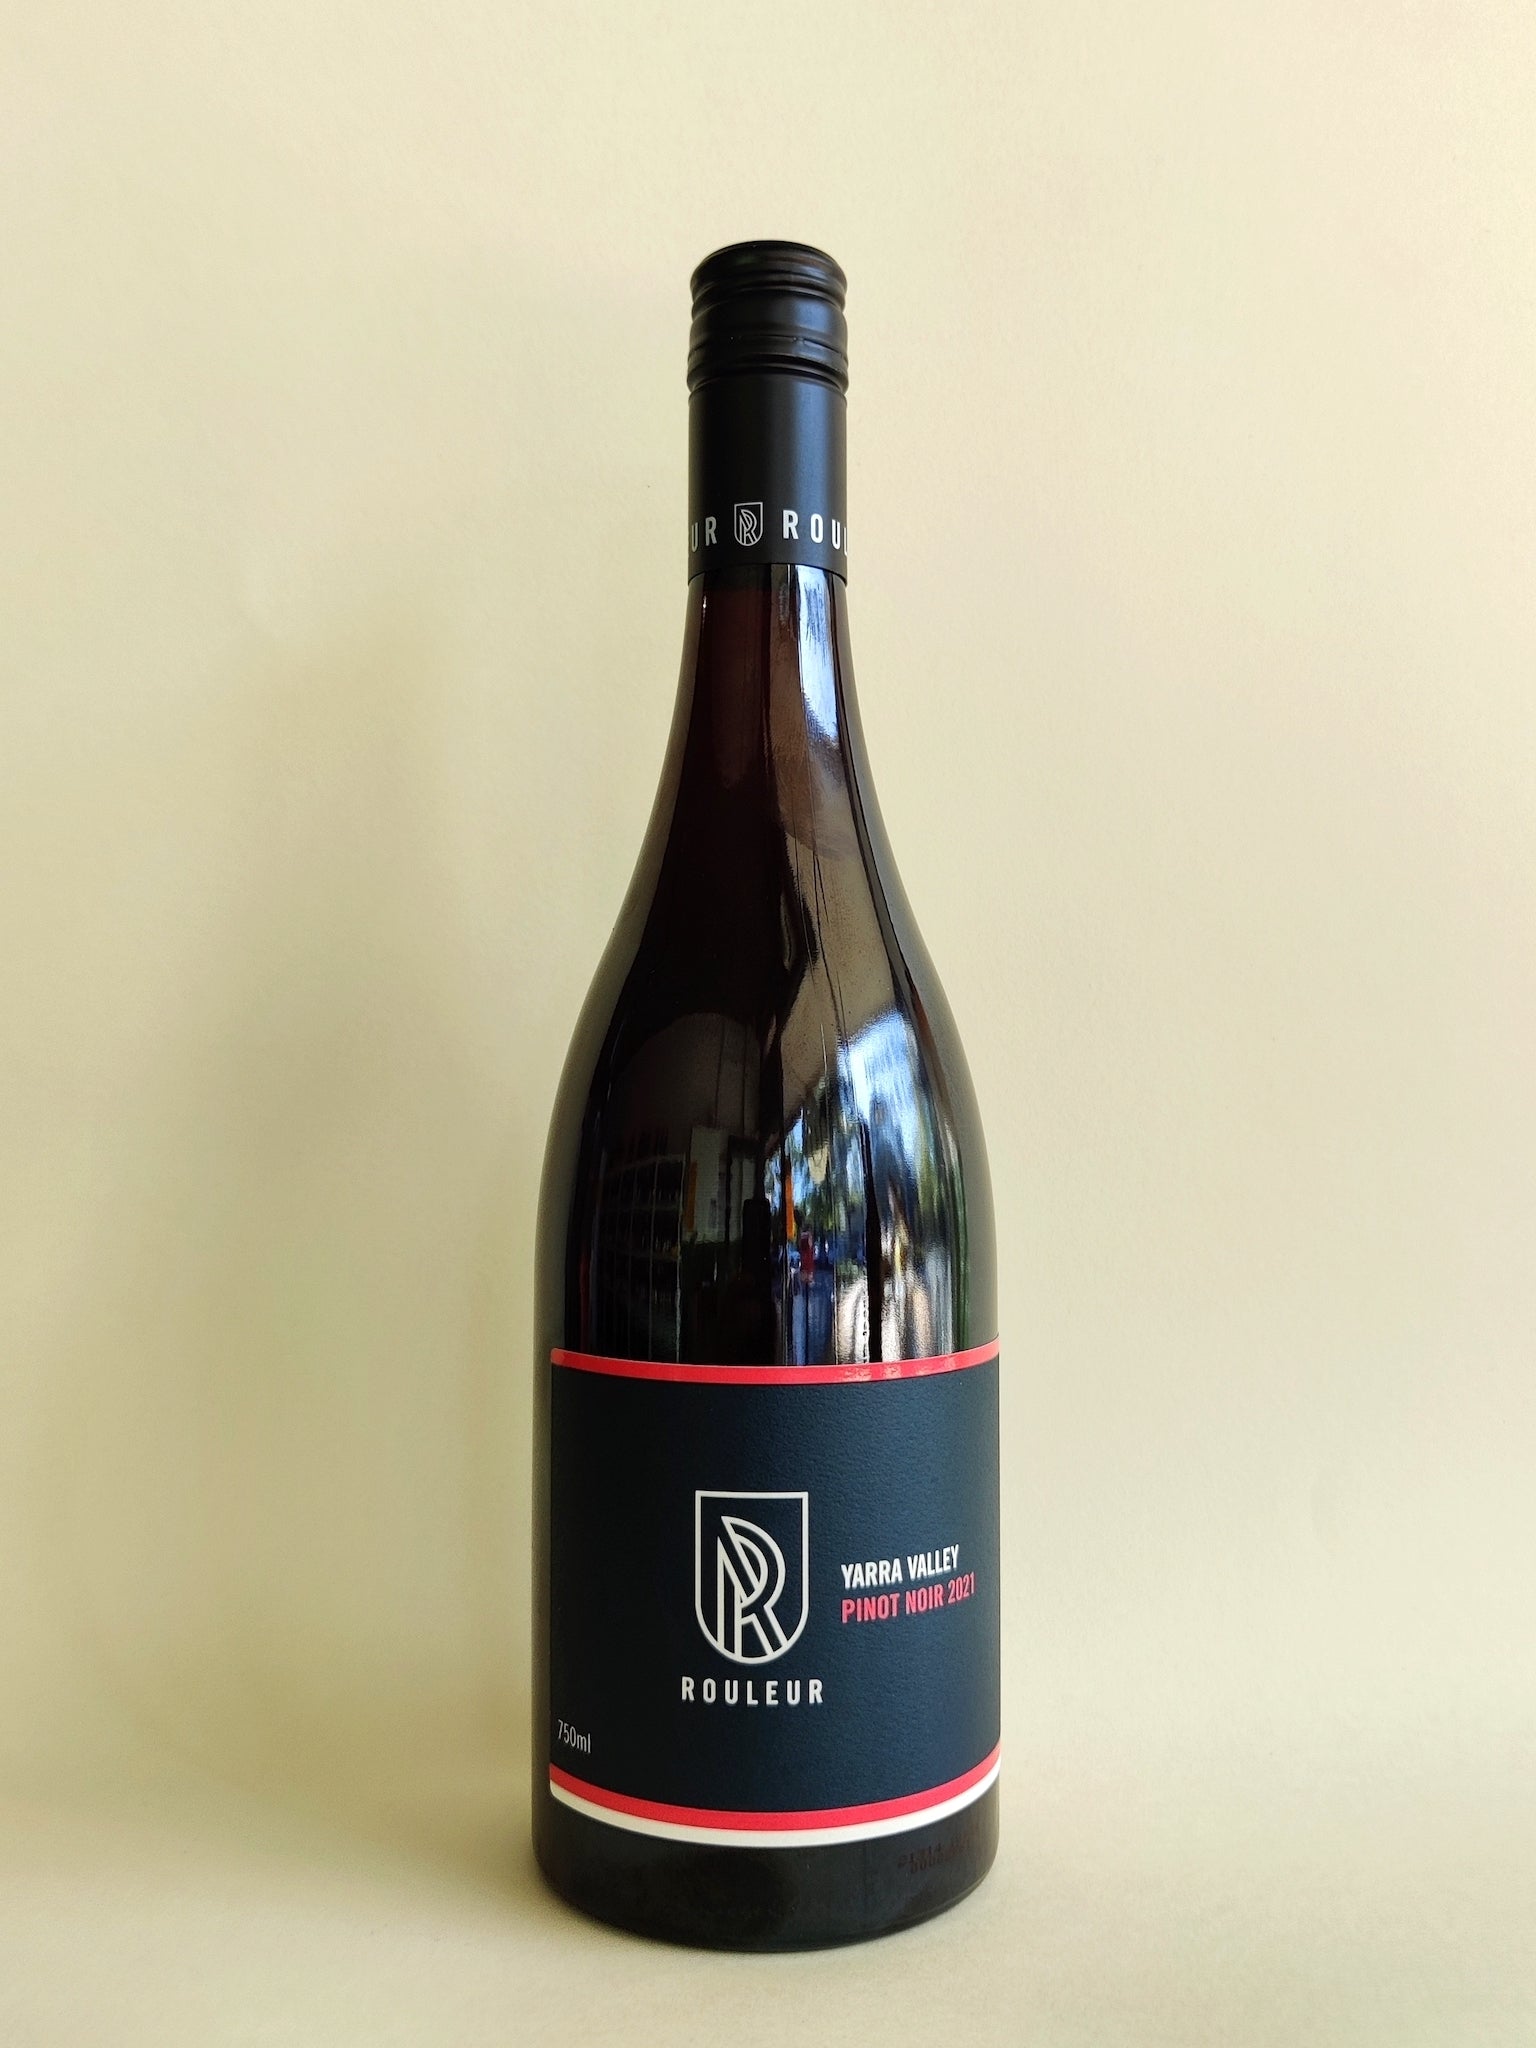 A bottle of Rouleur Pinot Noir from the Yarra Valley Victoria. 